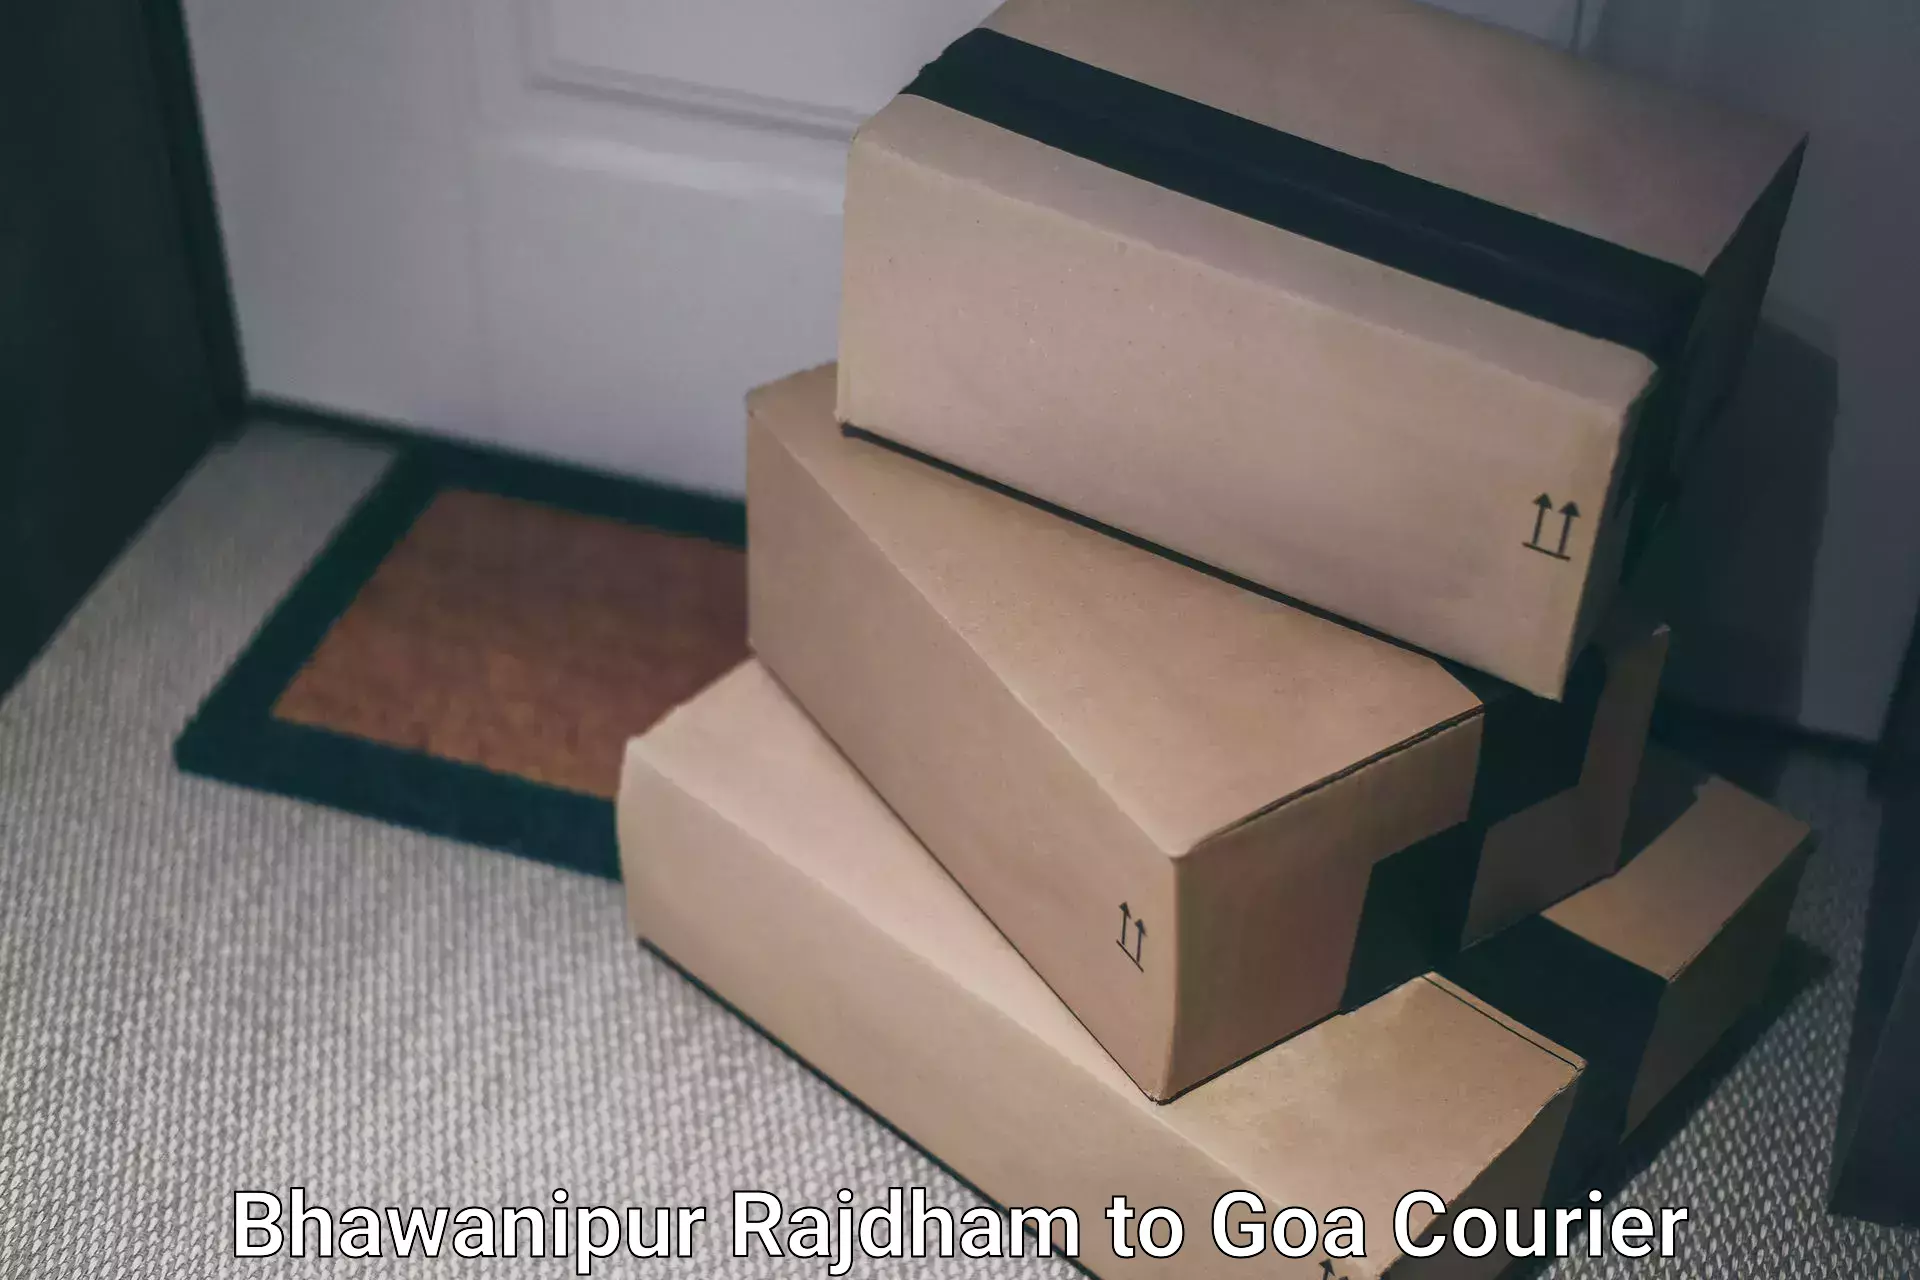 Easy access courier services in Bhawanipur Rajdham to IIT Goa